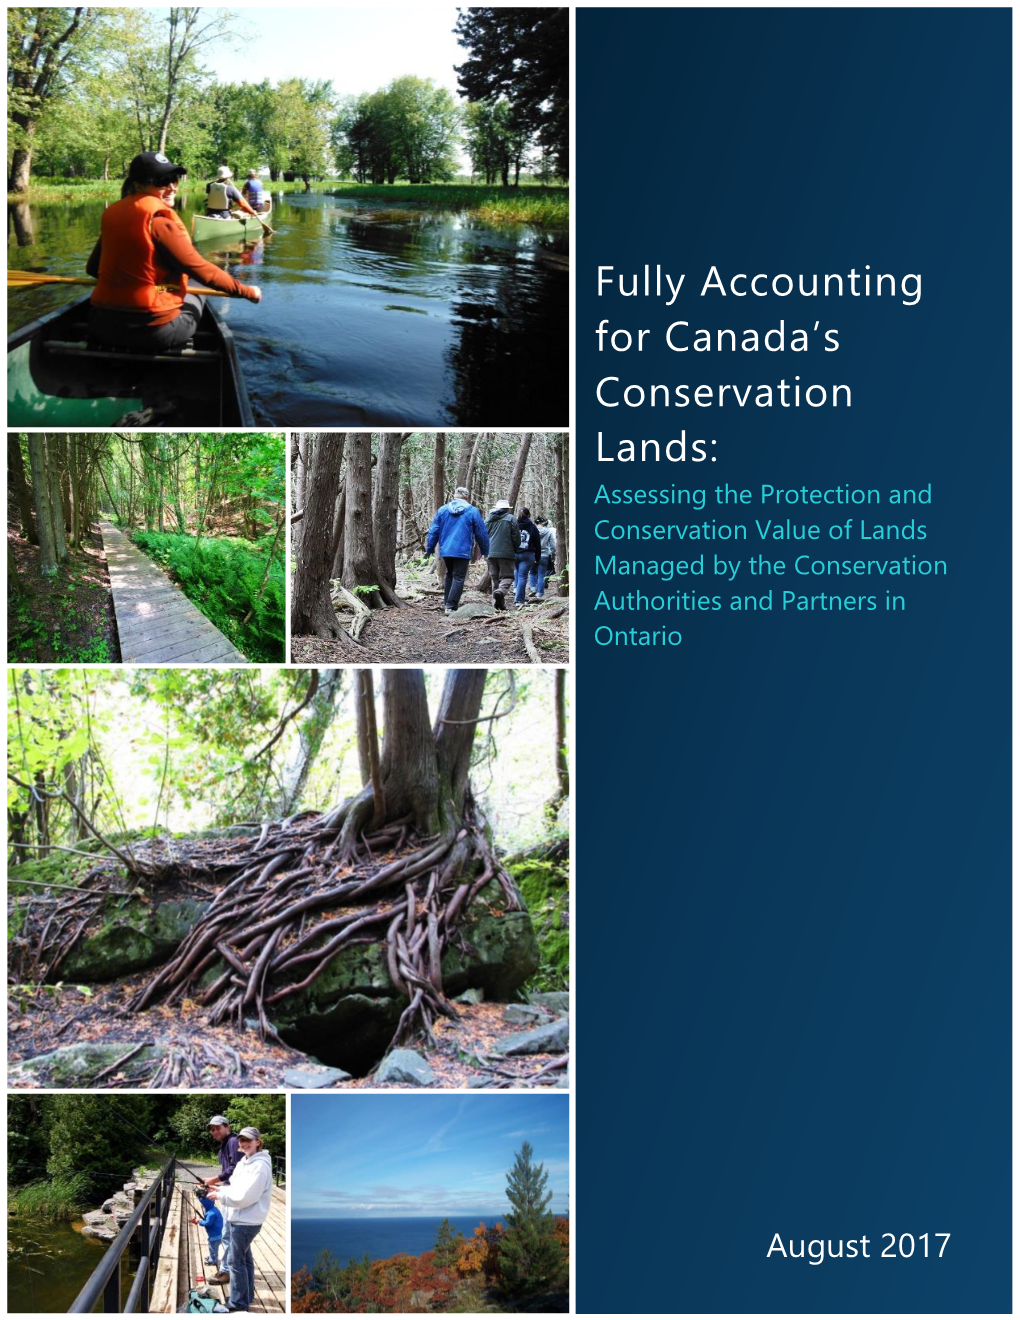 Fully Accounting for Canada's Conservation Lands (Phase 1)